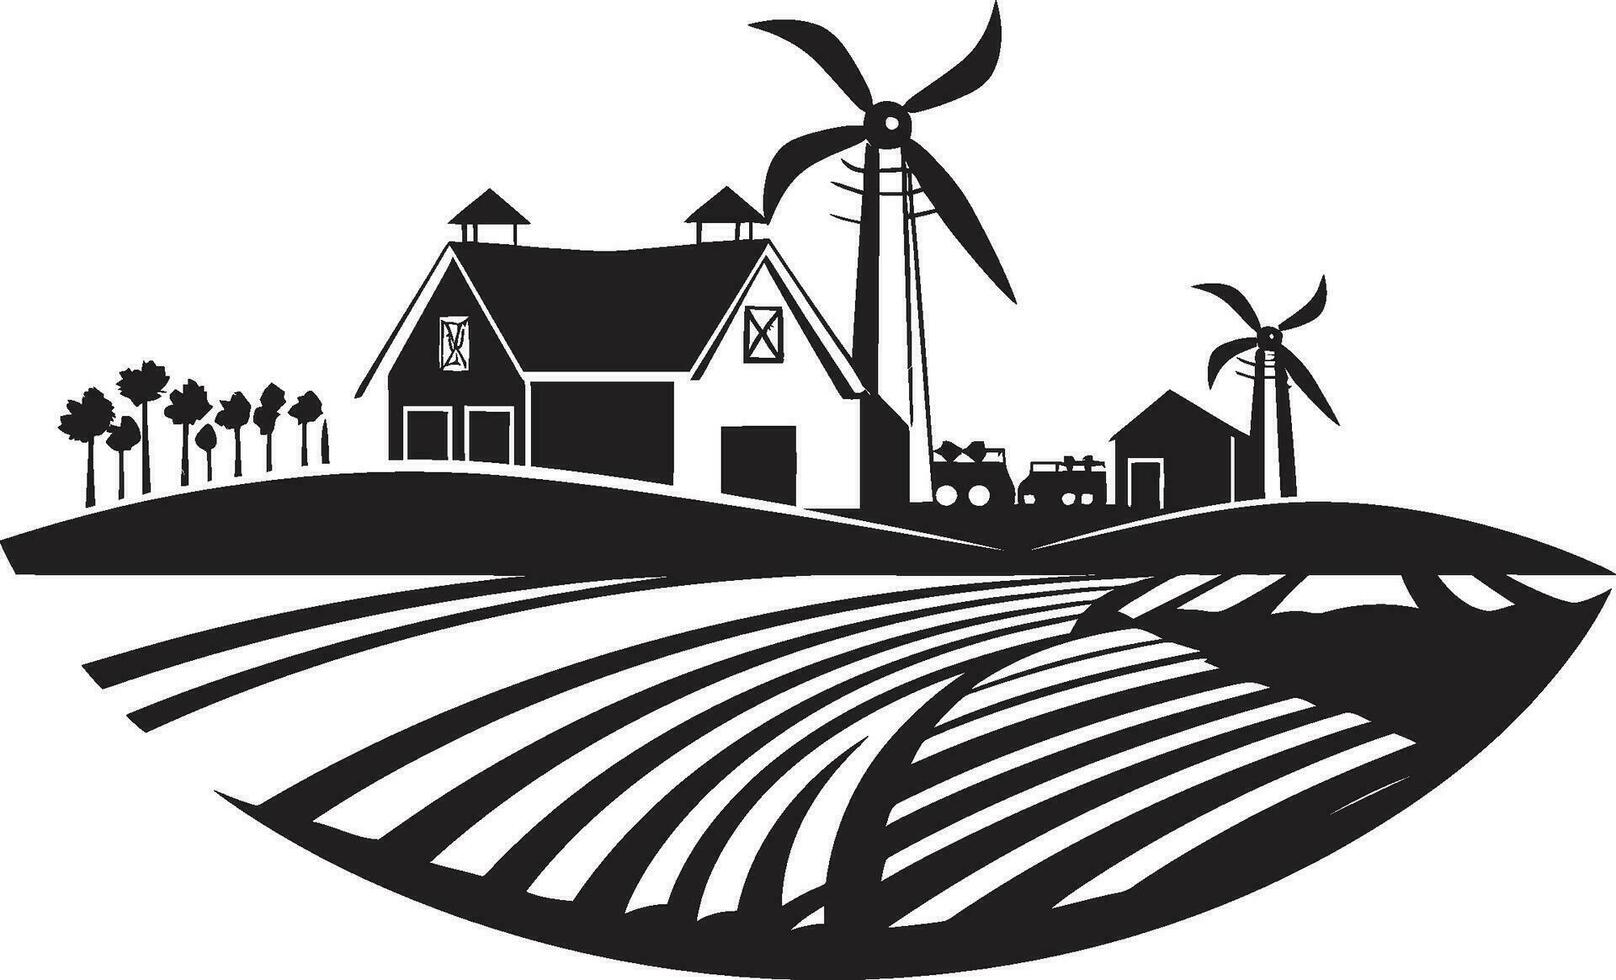 Countryside Sanctuary Agricultural Vector Icon Rustic Homestead Black Emblem Design